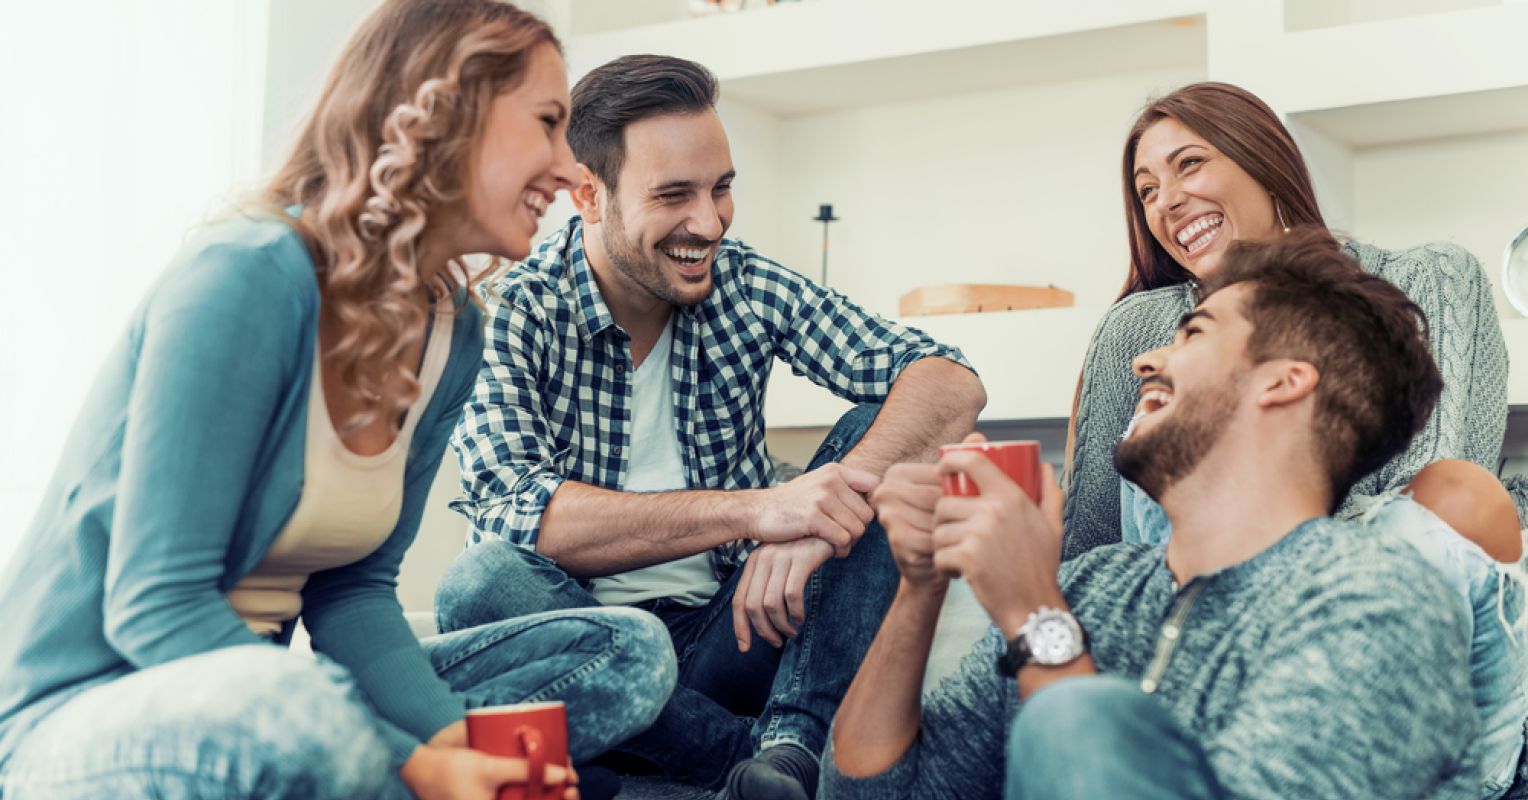 10 Key Strategies for Making Friends as an Adult